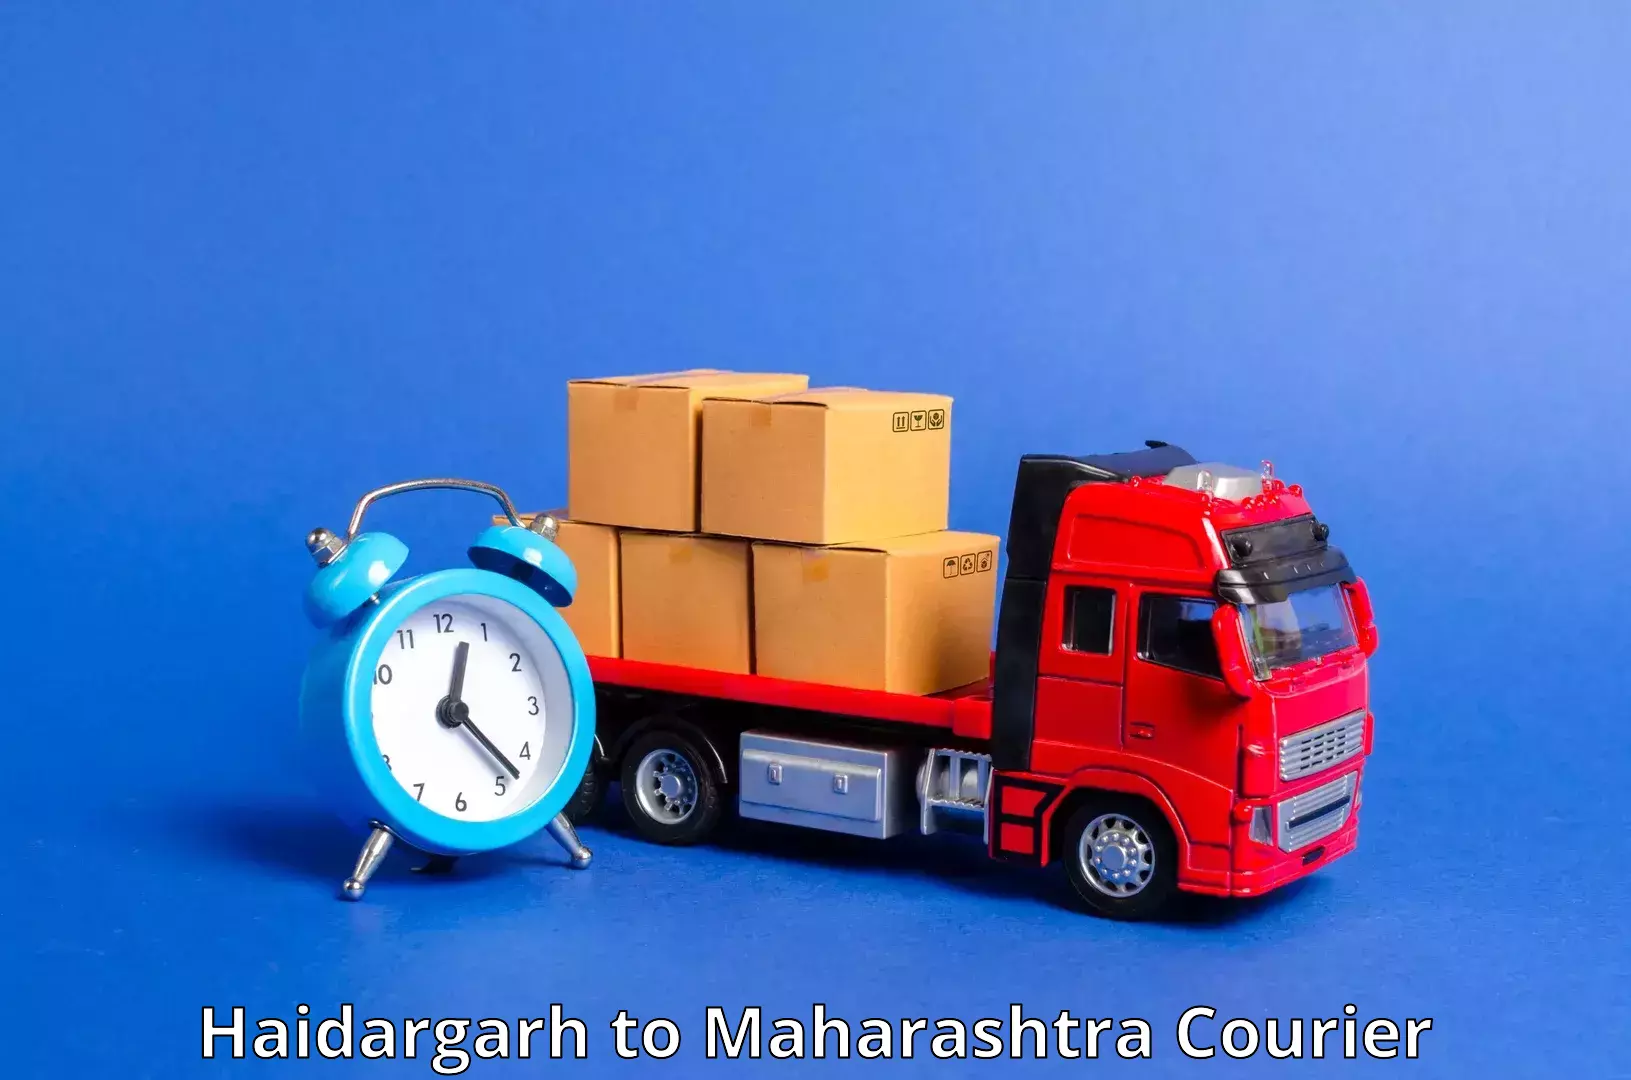 Cargo delivery service Haidargarh to Khed